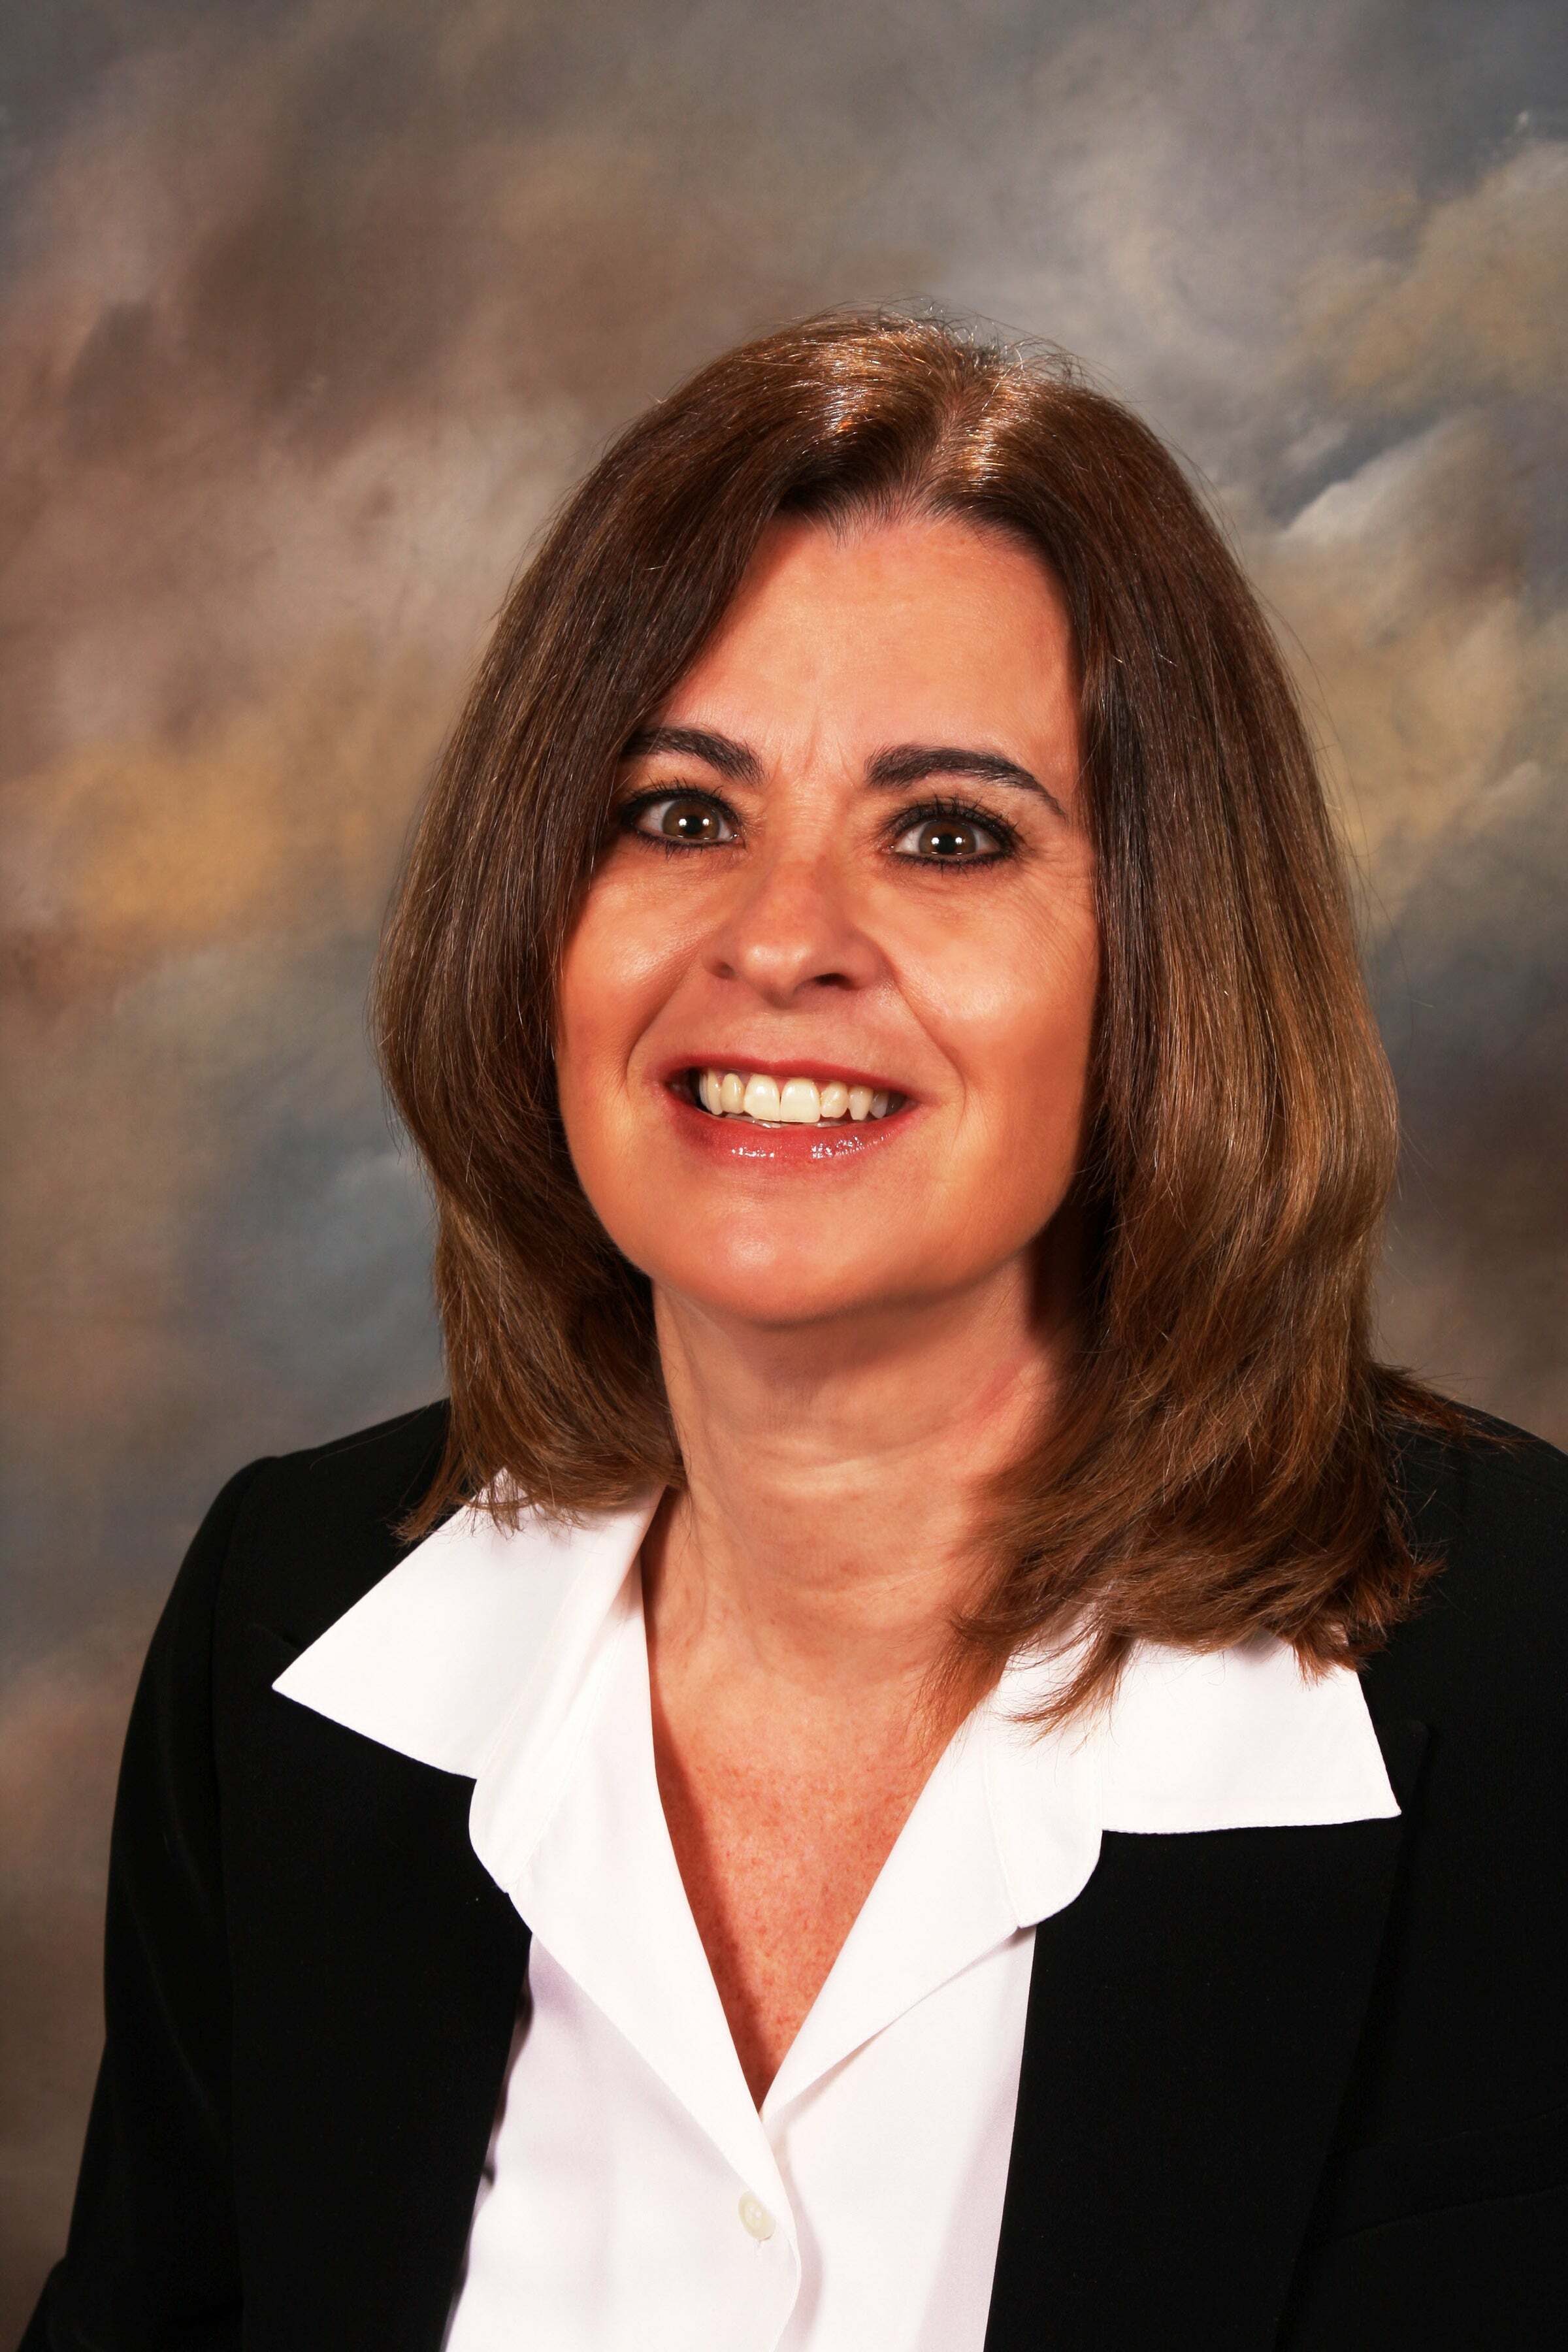 Sharon Whiting, Real Estate Salesperson in Fair Oaks, Reliance Partners